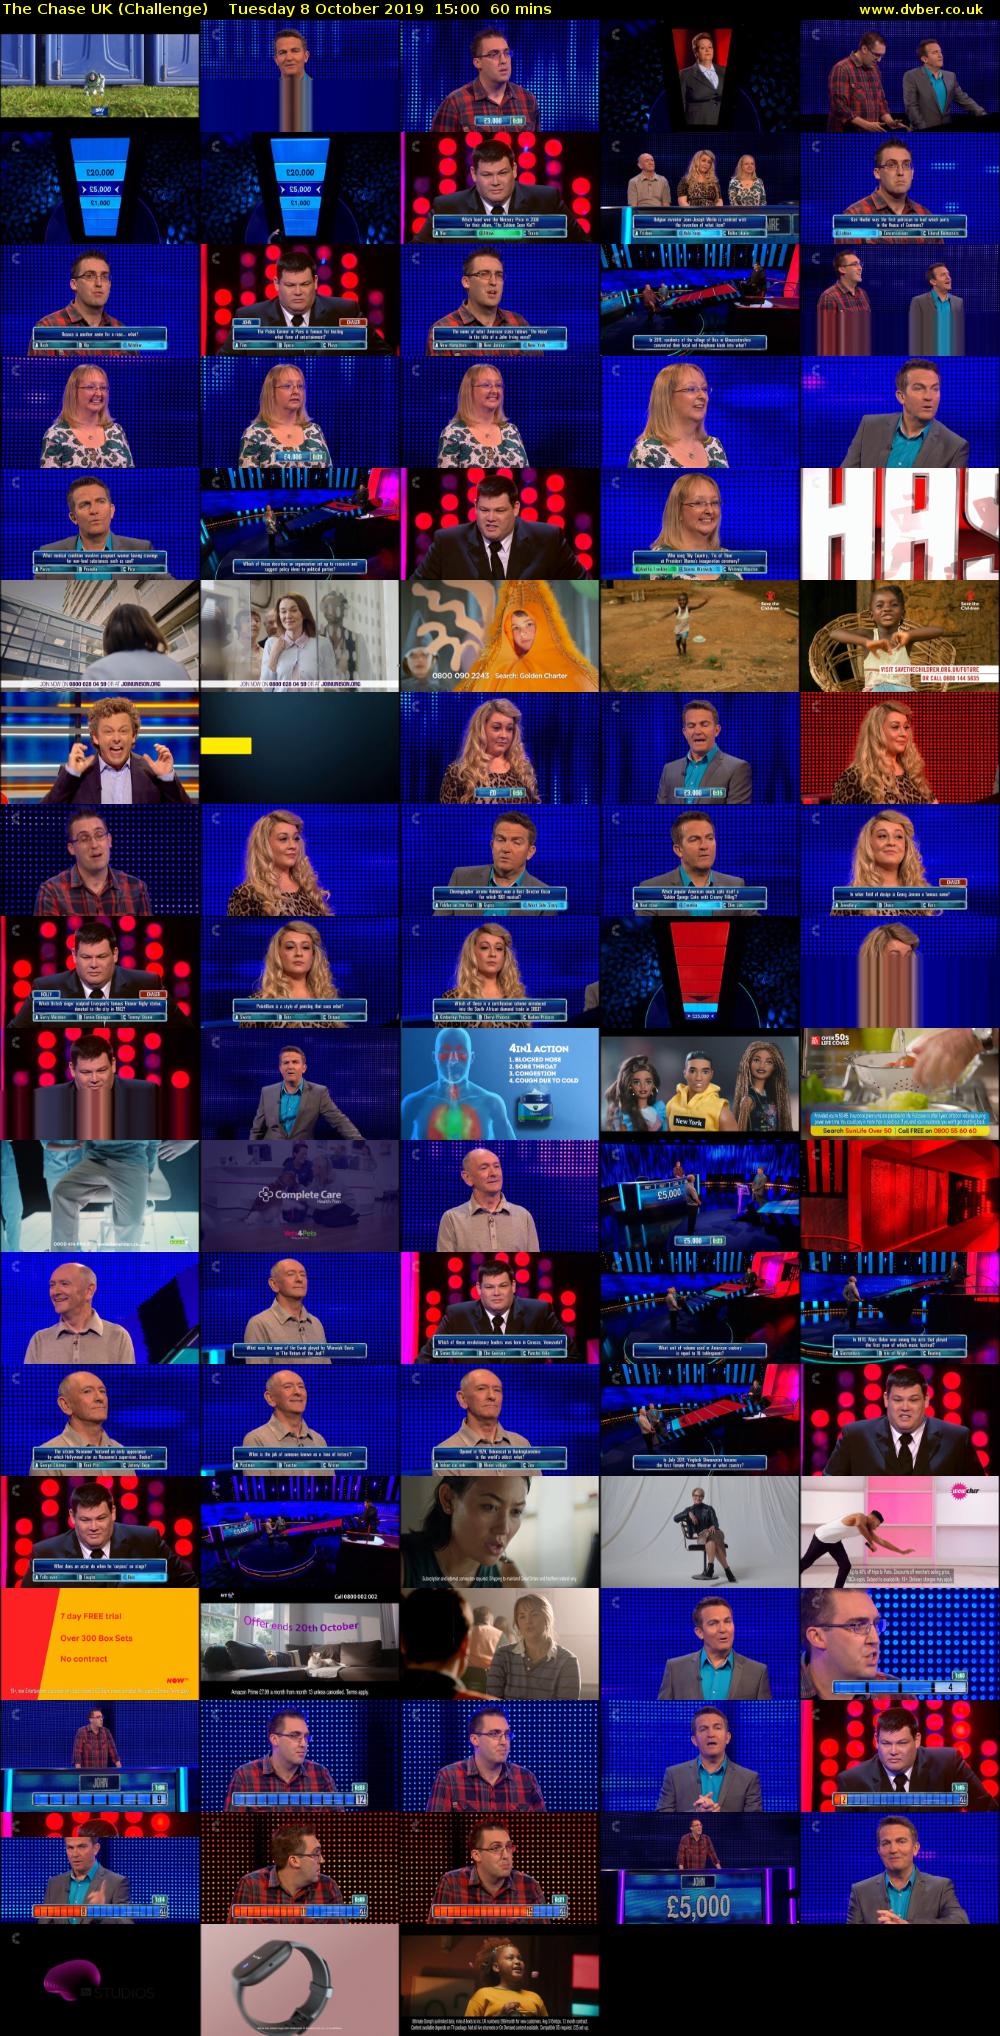 The Chase UK (Challenge) Tuesday 8 October 2019 15:00 - 16:00